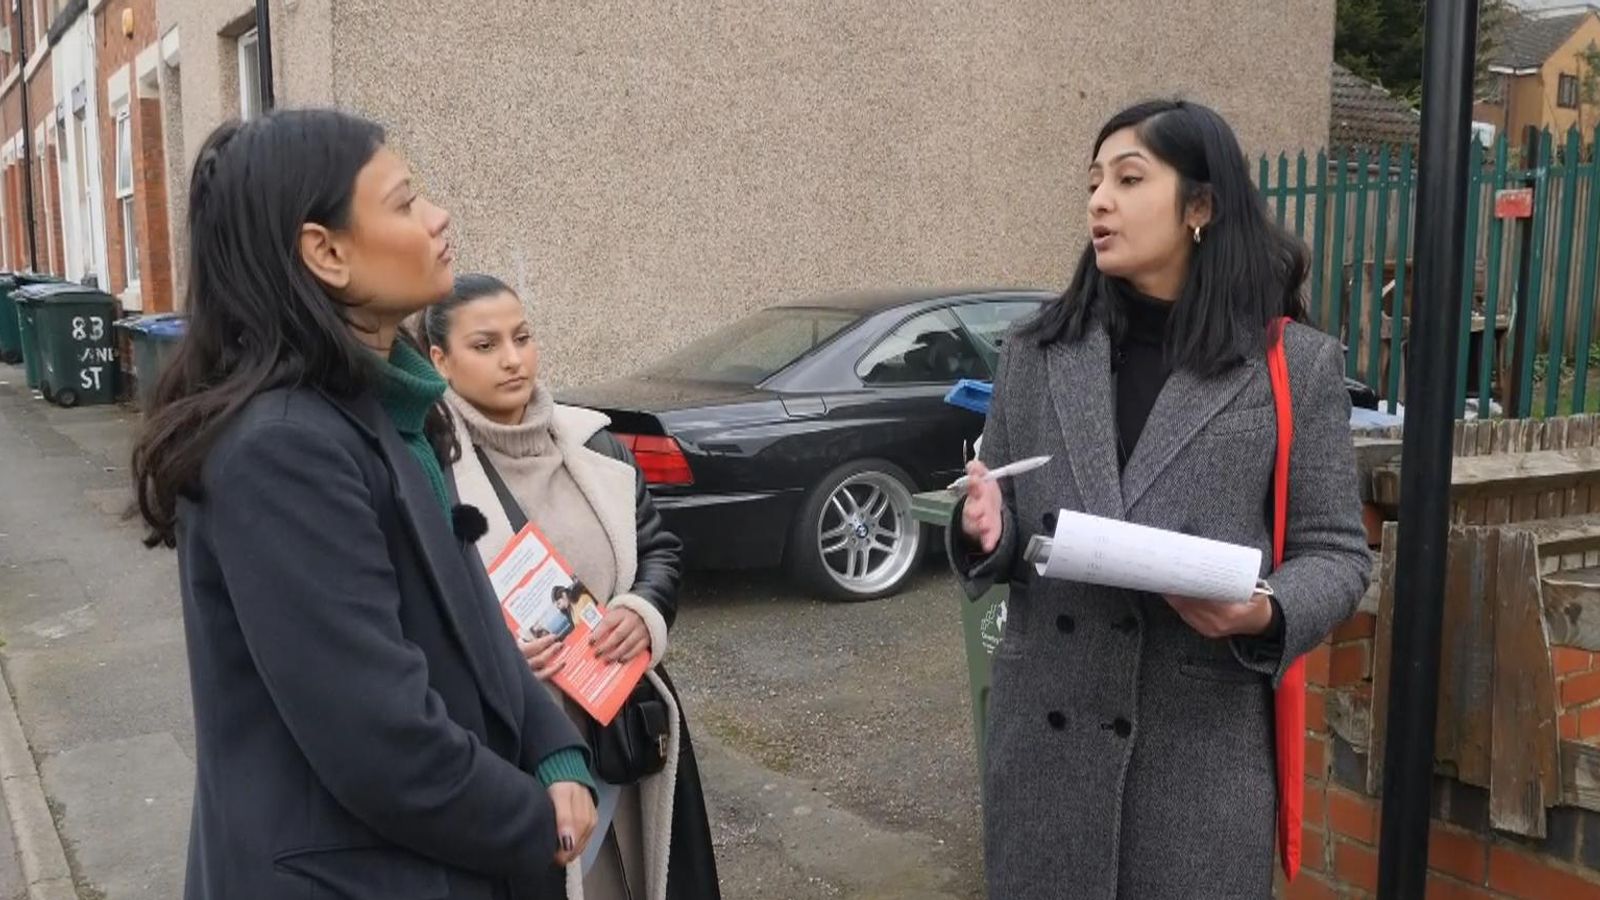 A day out with Labour MP Zarah Sultana reveals how she constantly has to think about her safety